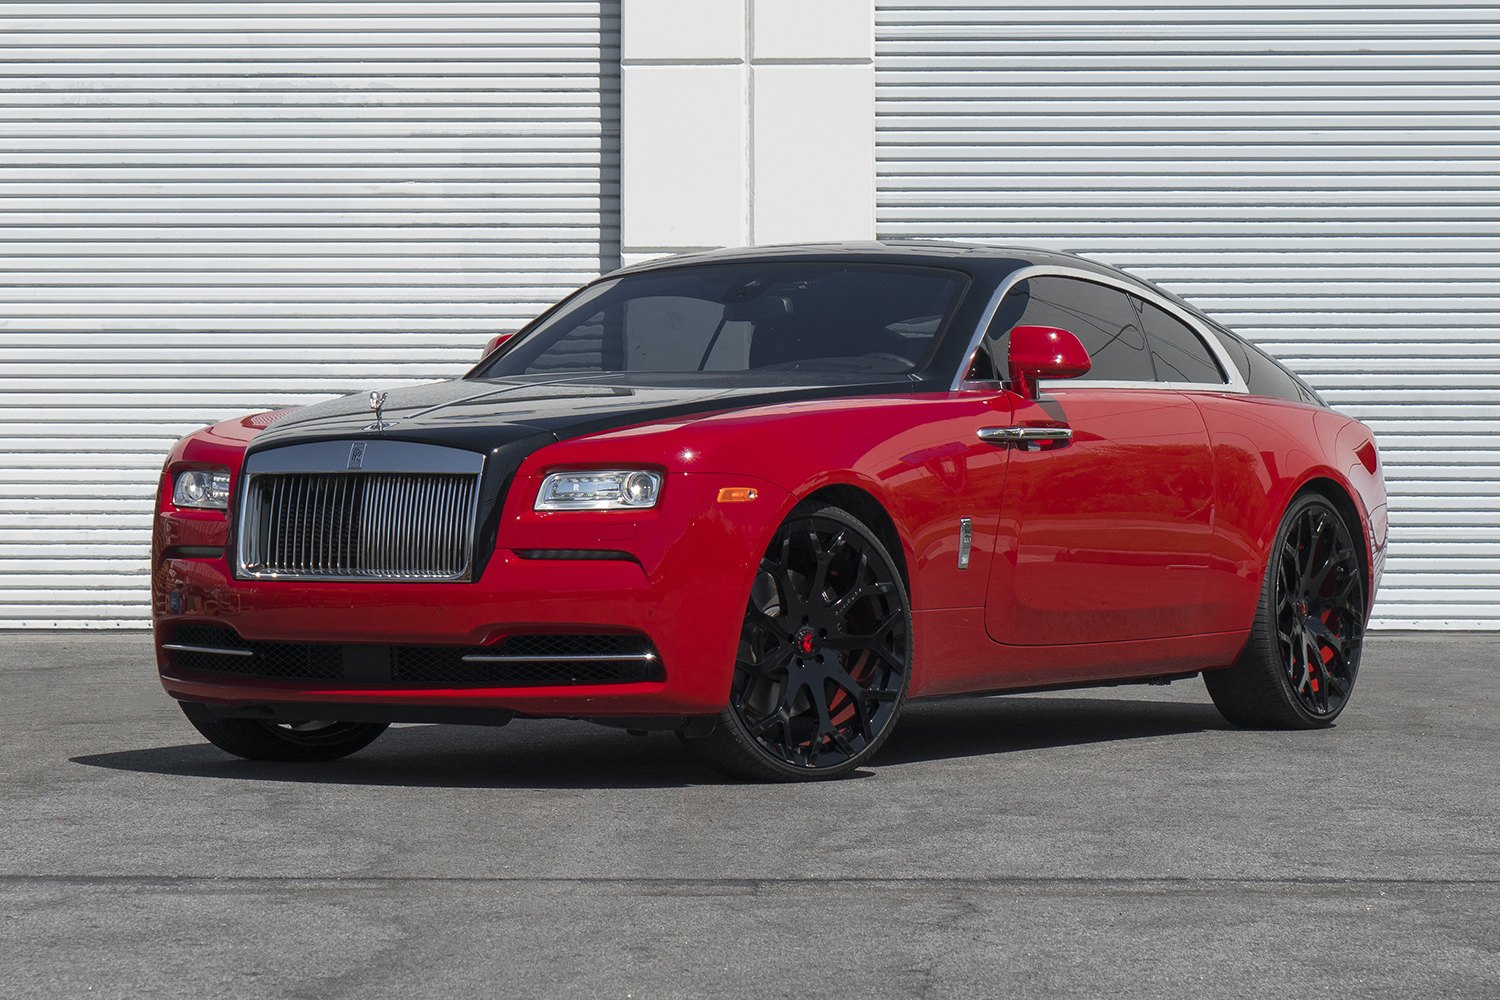 Chrome Billet Grille on Red Rolls Royce Wraith - Photo by Forgiato